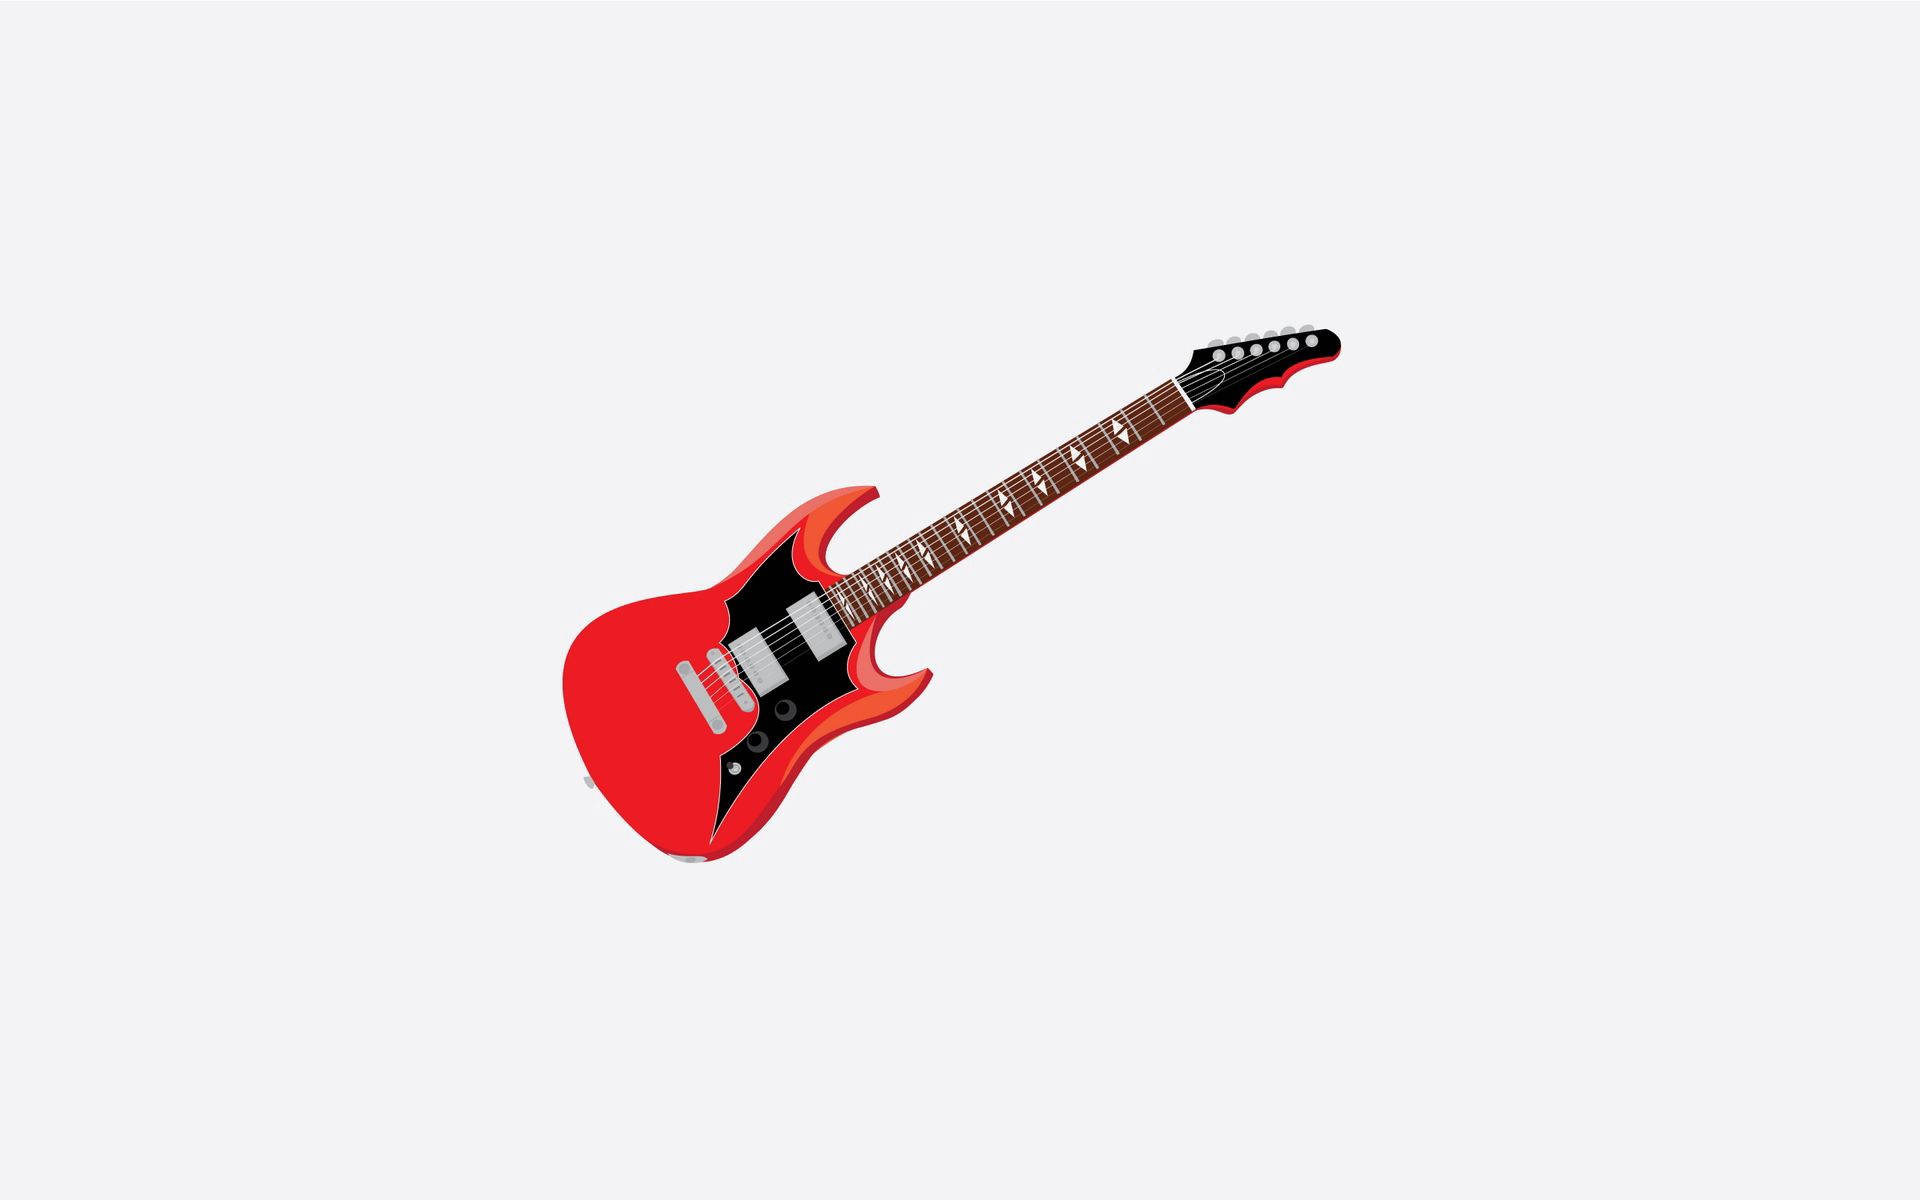 Minimalist Red Electric Guitar Cover Background